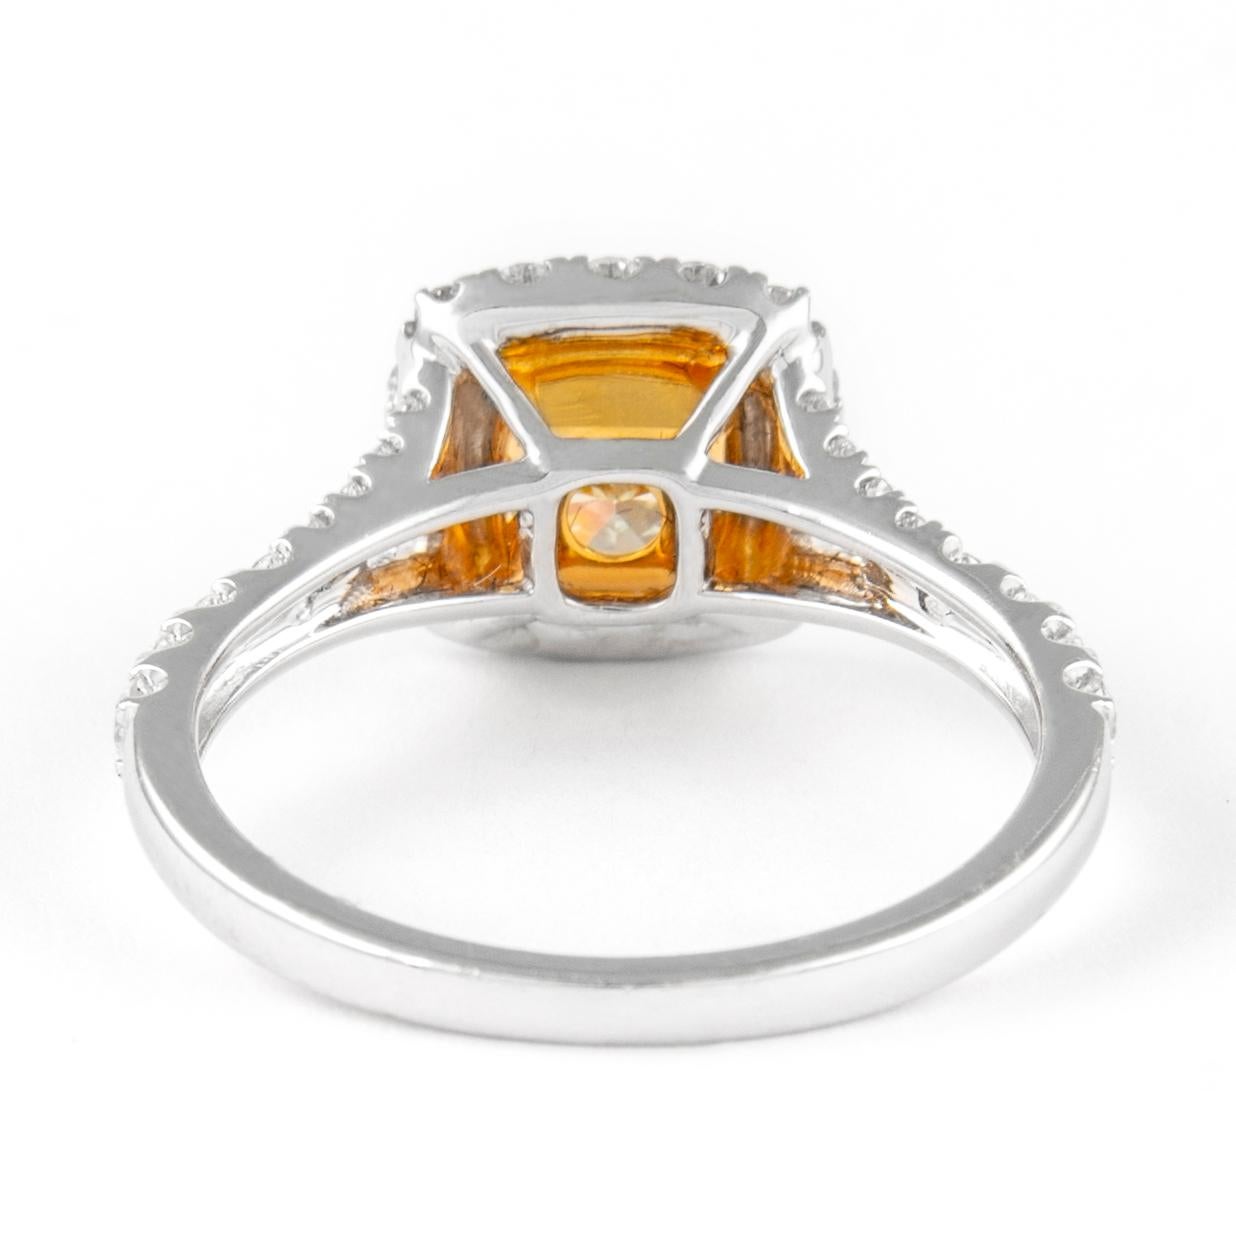 Alexander 2.13ctt Fancy Yellow Cushion Diamond with Halo Ring 18k Two Tone In New Condition For Sale In BEVERLY HILLS, CA